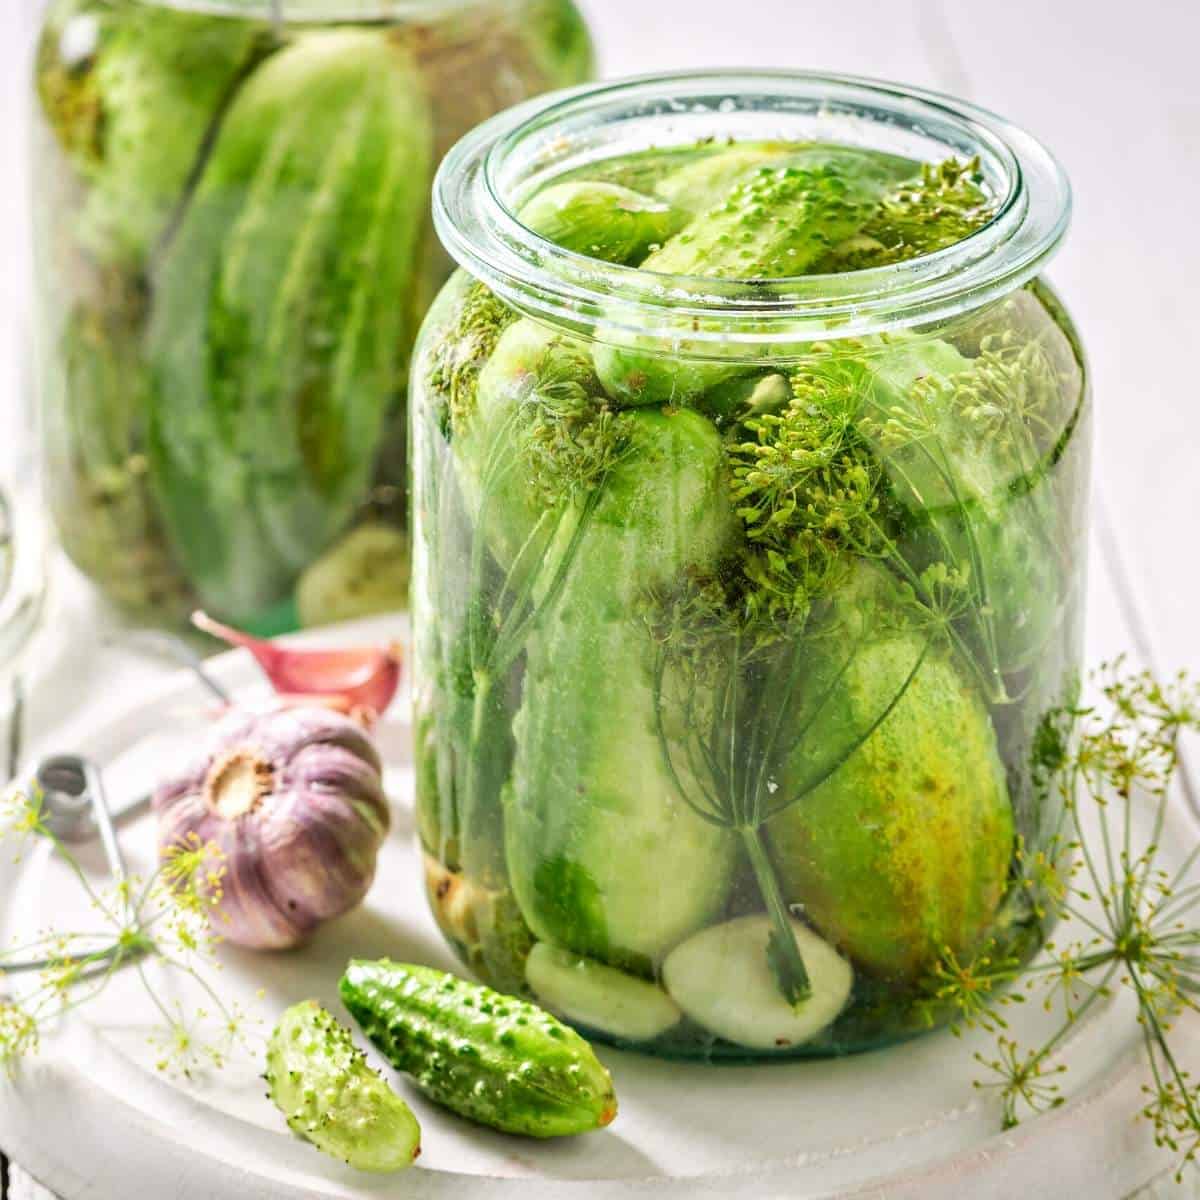 cucmber to be pickles in a jar - Pickles are Keto & Here's why with Recipes